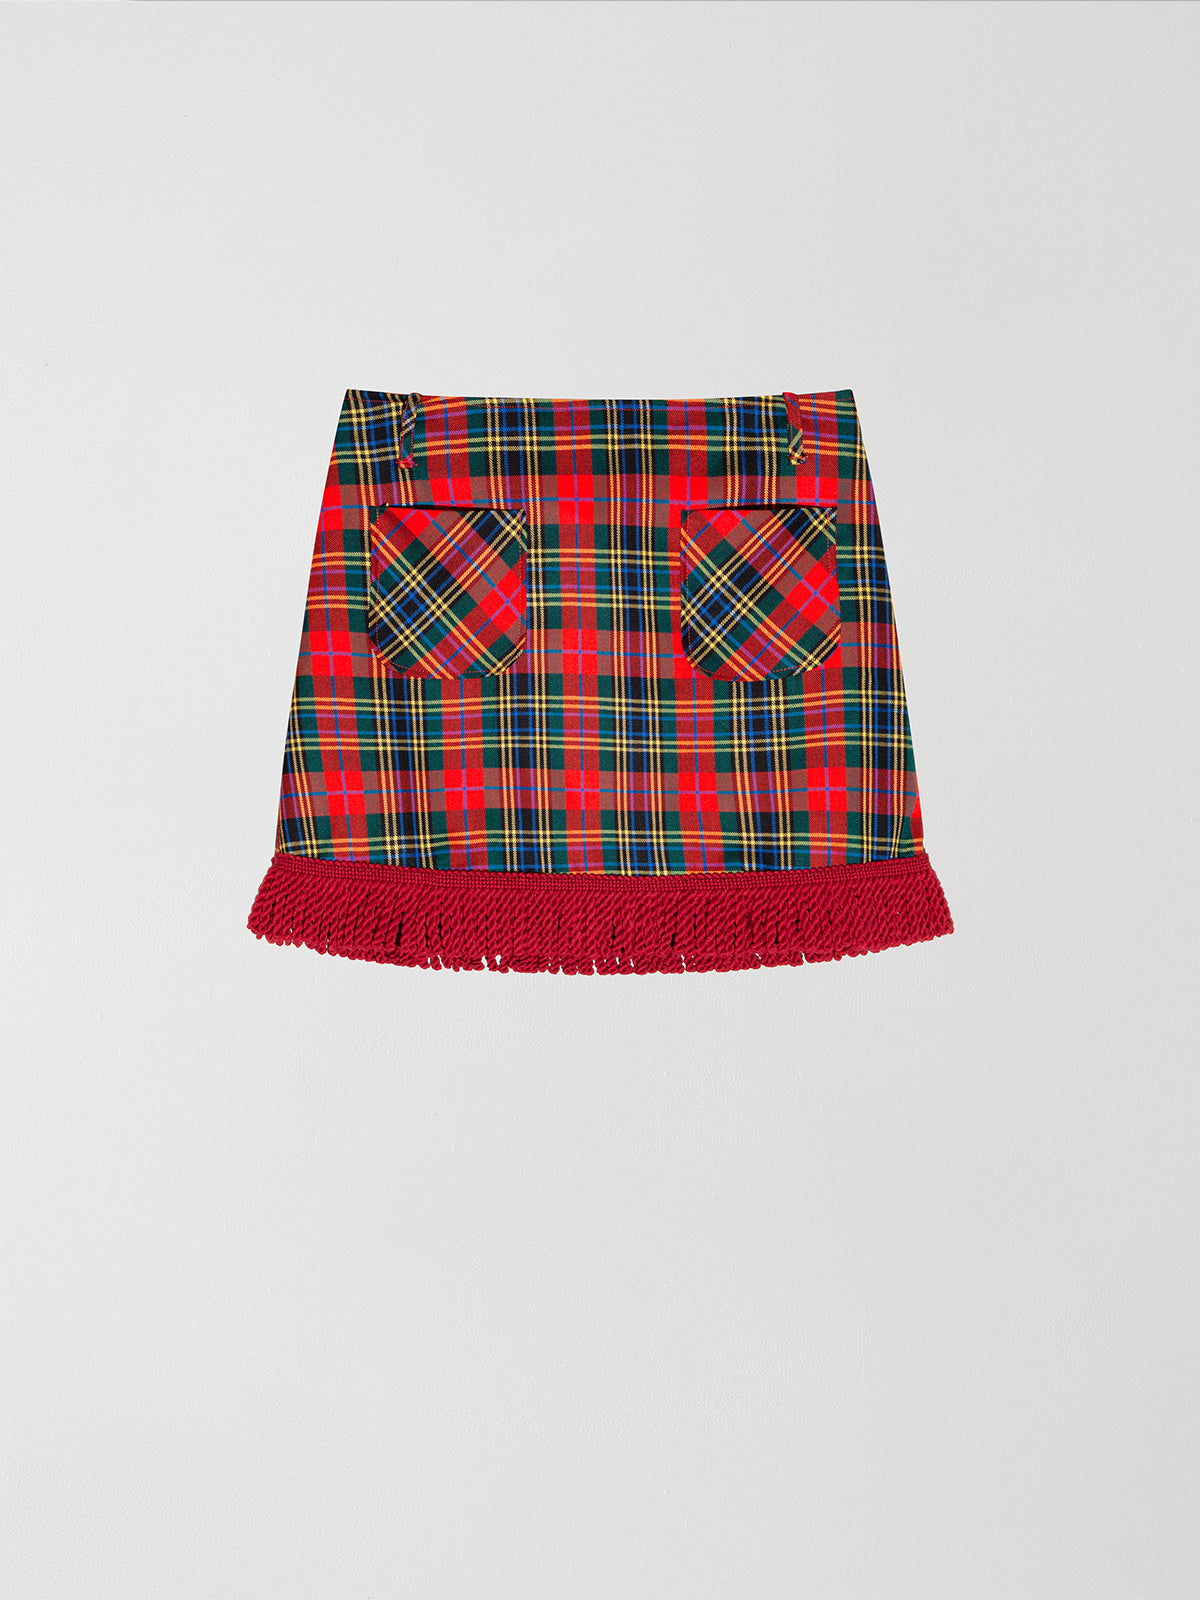 Plaid mini skirt in red, green and yellow with fringed detail at the bottom. 